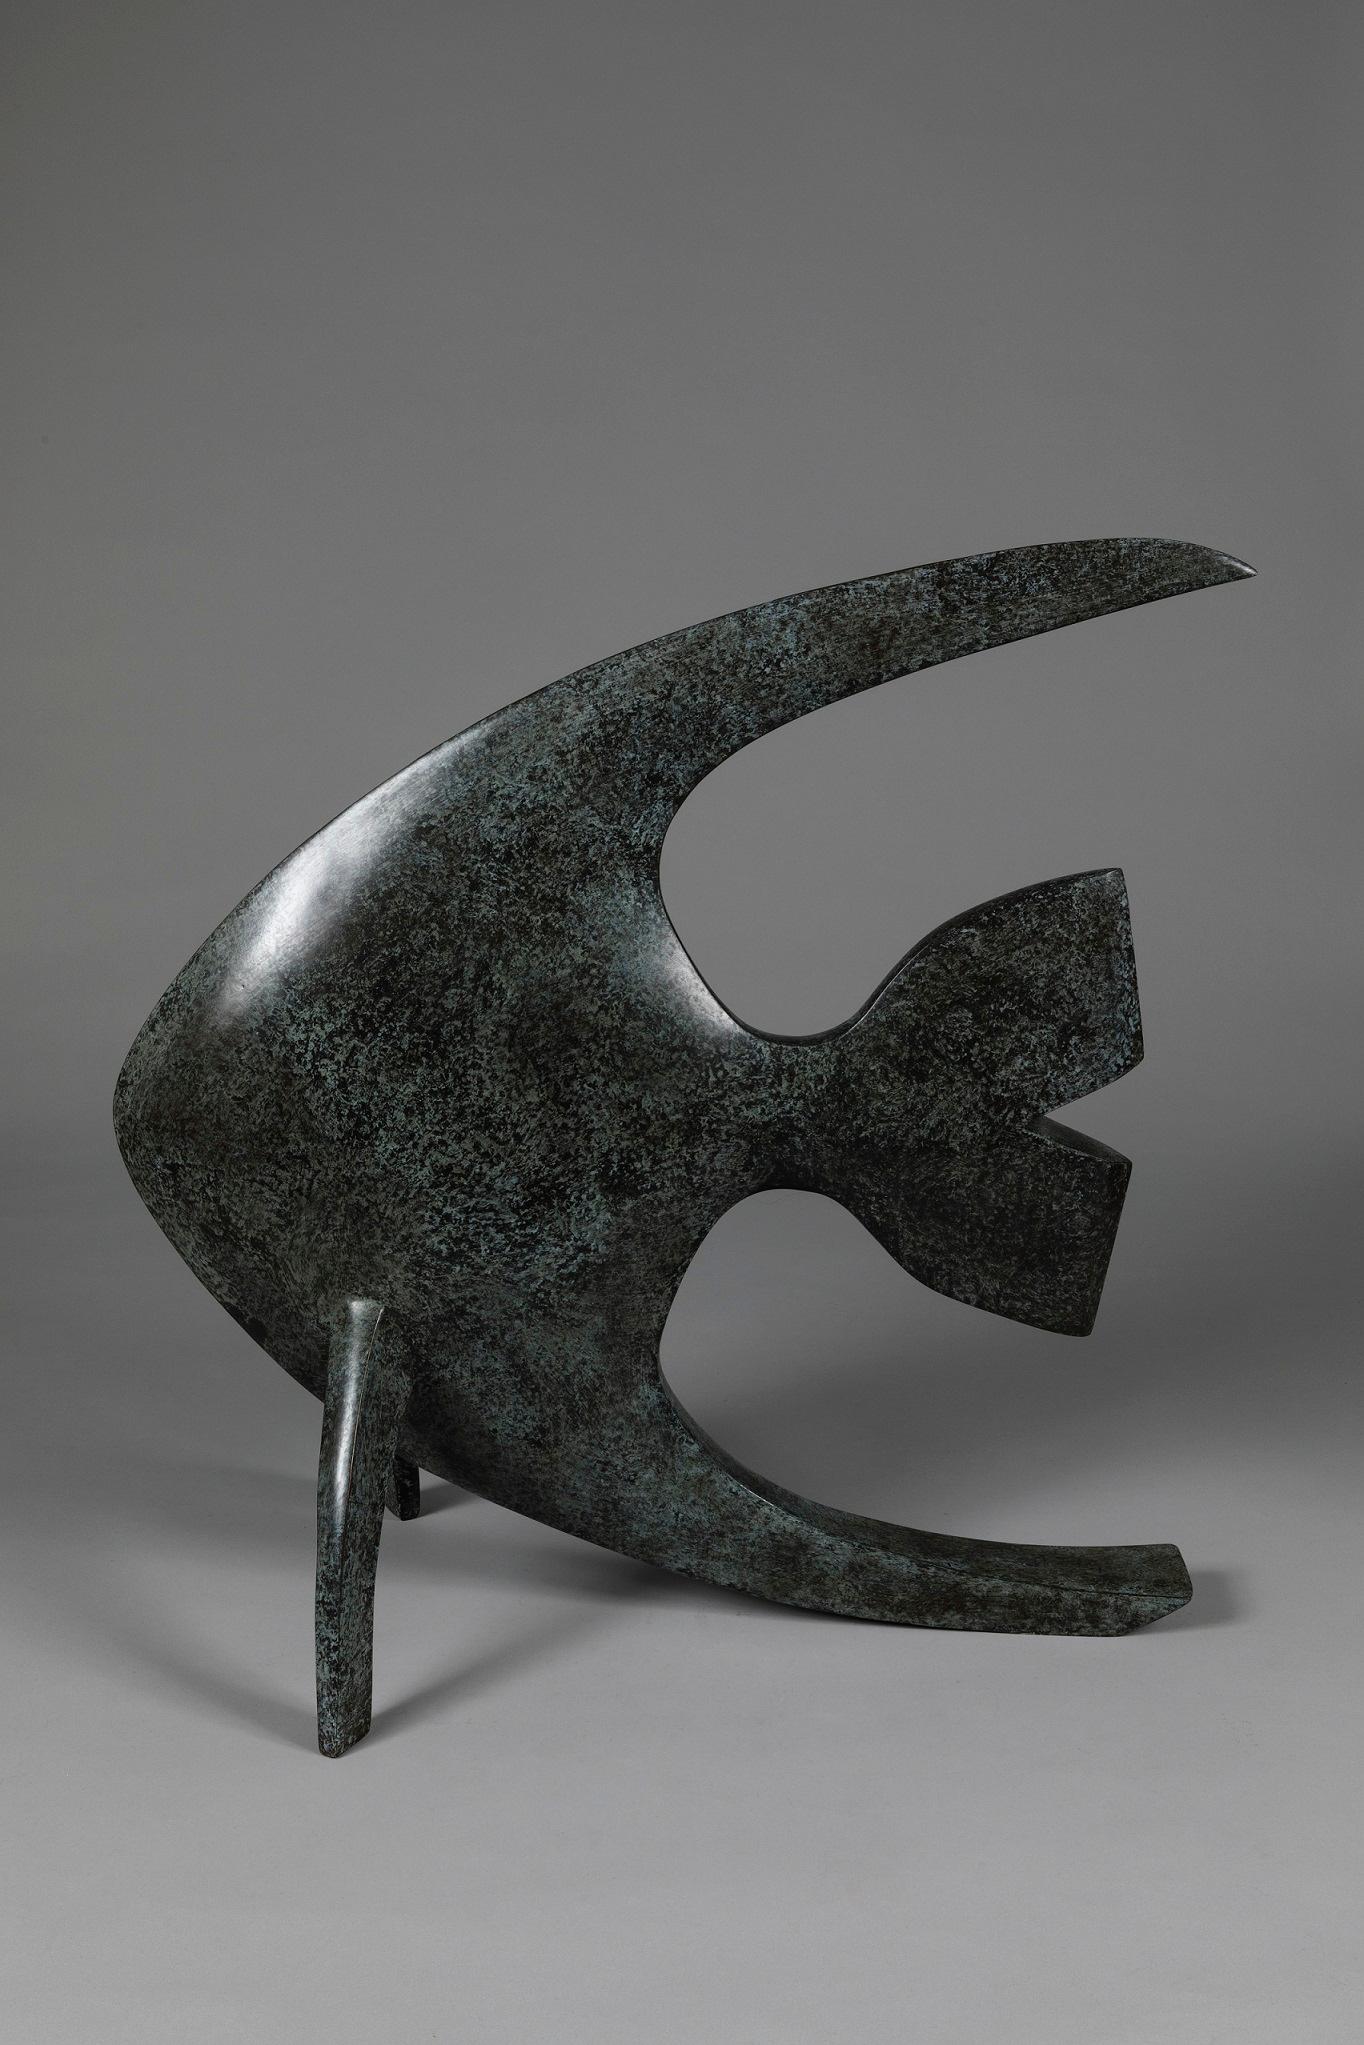 Acqua is a bronze sculpture of a fish by Marie Louise Sorbac. 63 cm × 32 cm × 63 cm.

This sculpture is part of a series celebrating nature and the animal kingdom. It is available in a limited edition of 8 copies and 4 artist's proofs. Specific